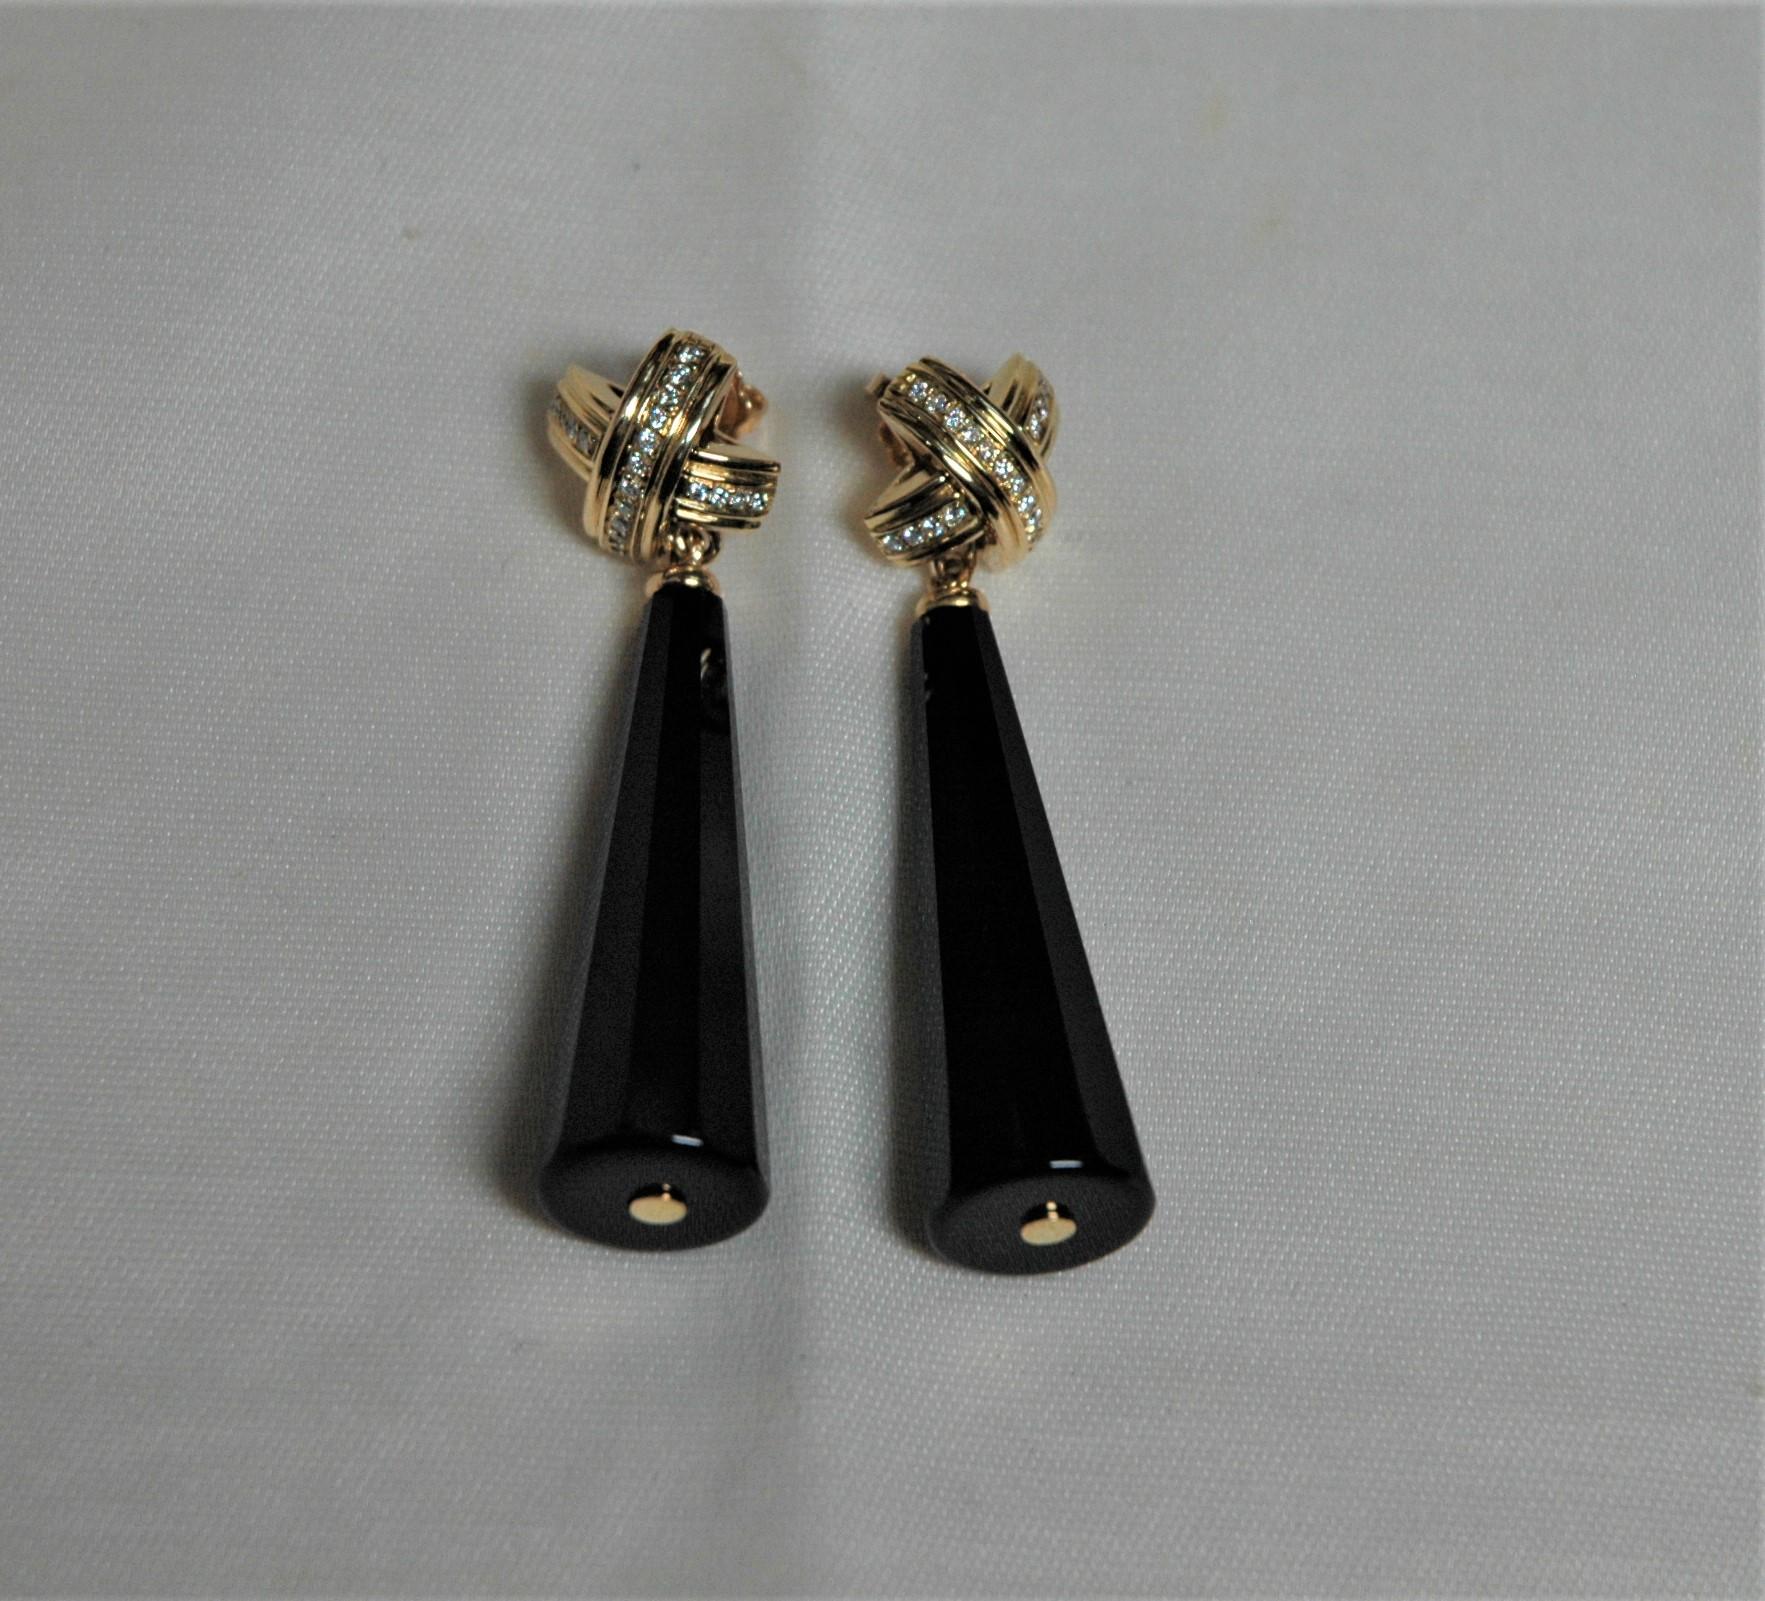 Very original dangle earrings. They have been made by Italian manufacturing with a top like a cross in yellow gold 18 kt and diamonds, brilliant cut, 0.48 ct. They are very particular about the shape of the onyx pendants, which are all faceted along